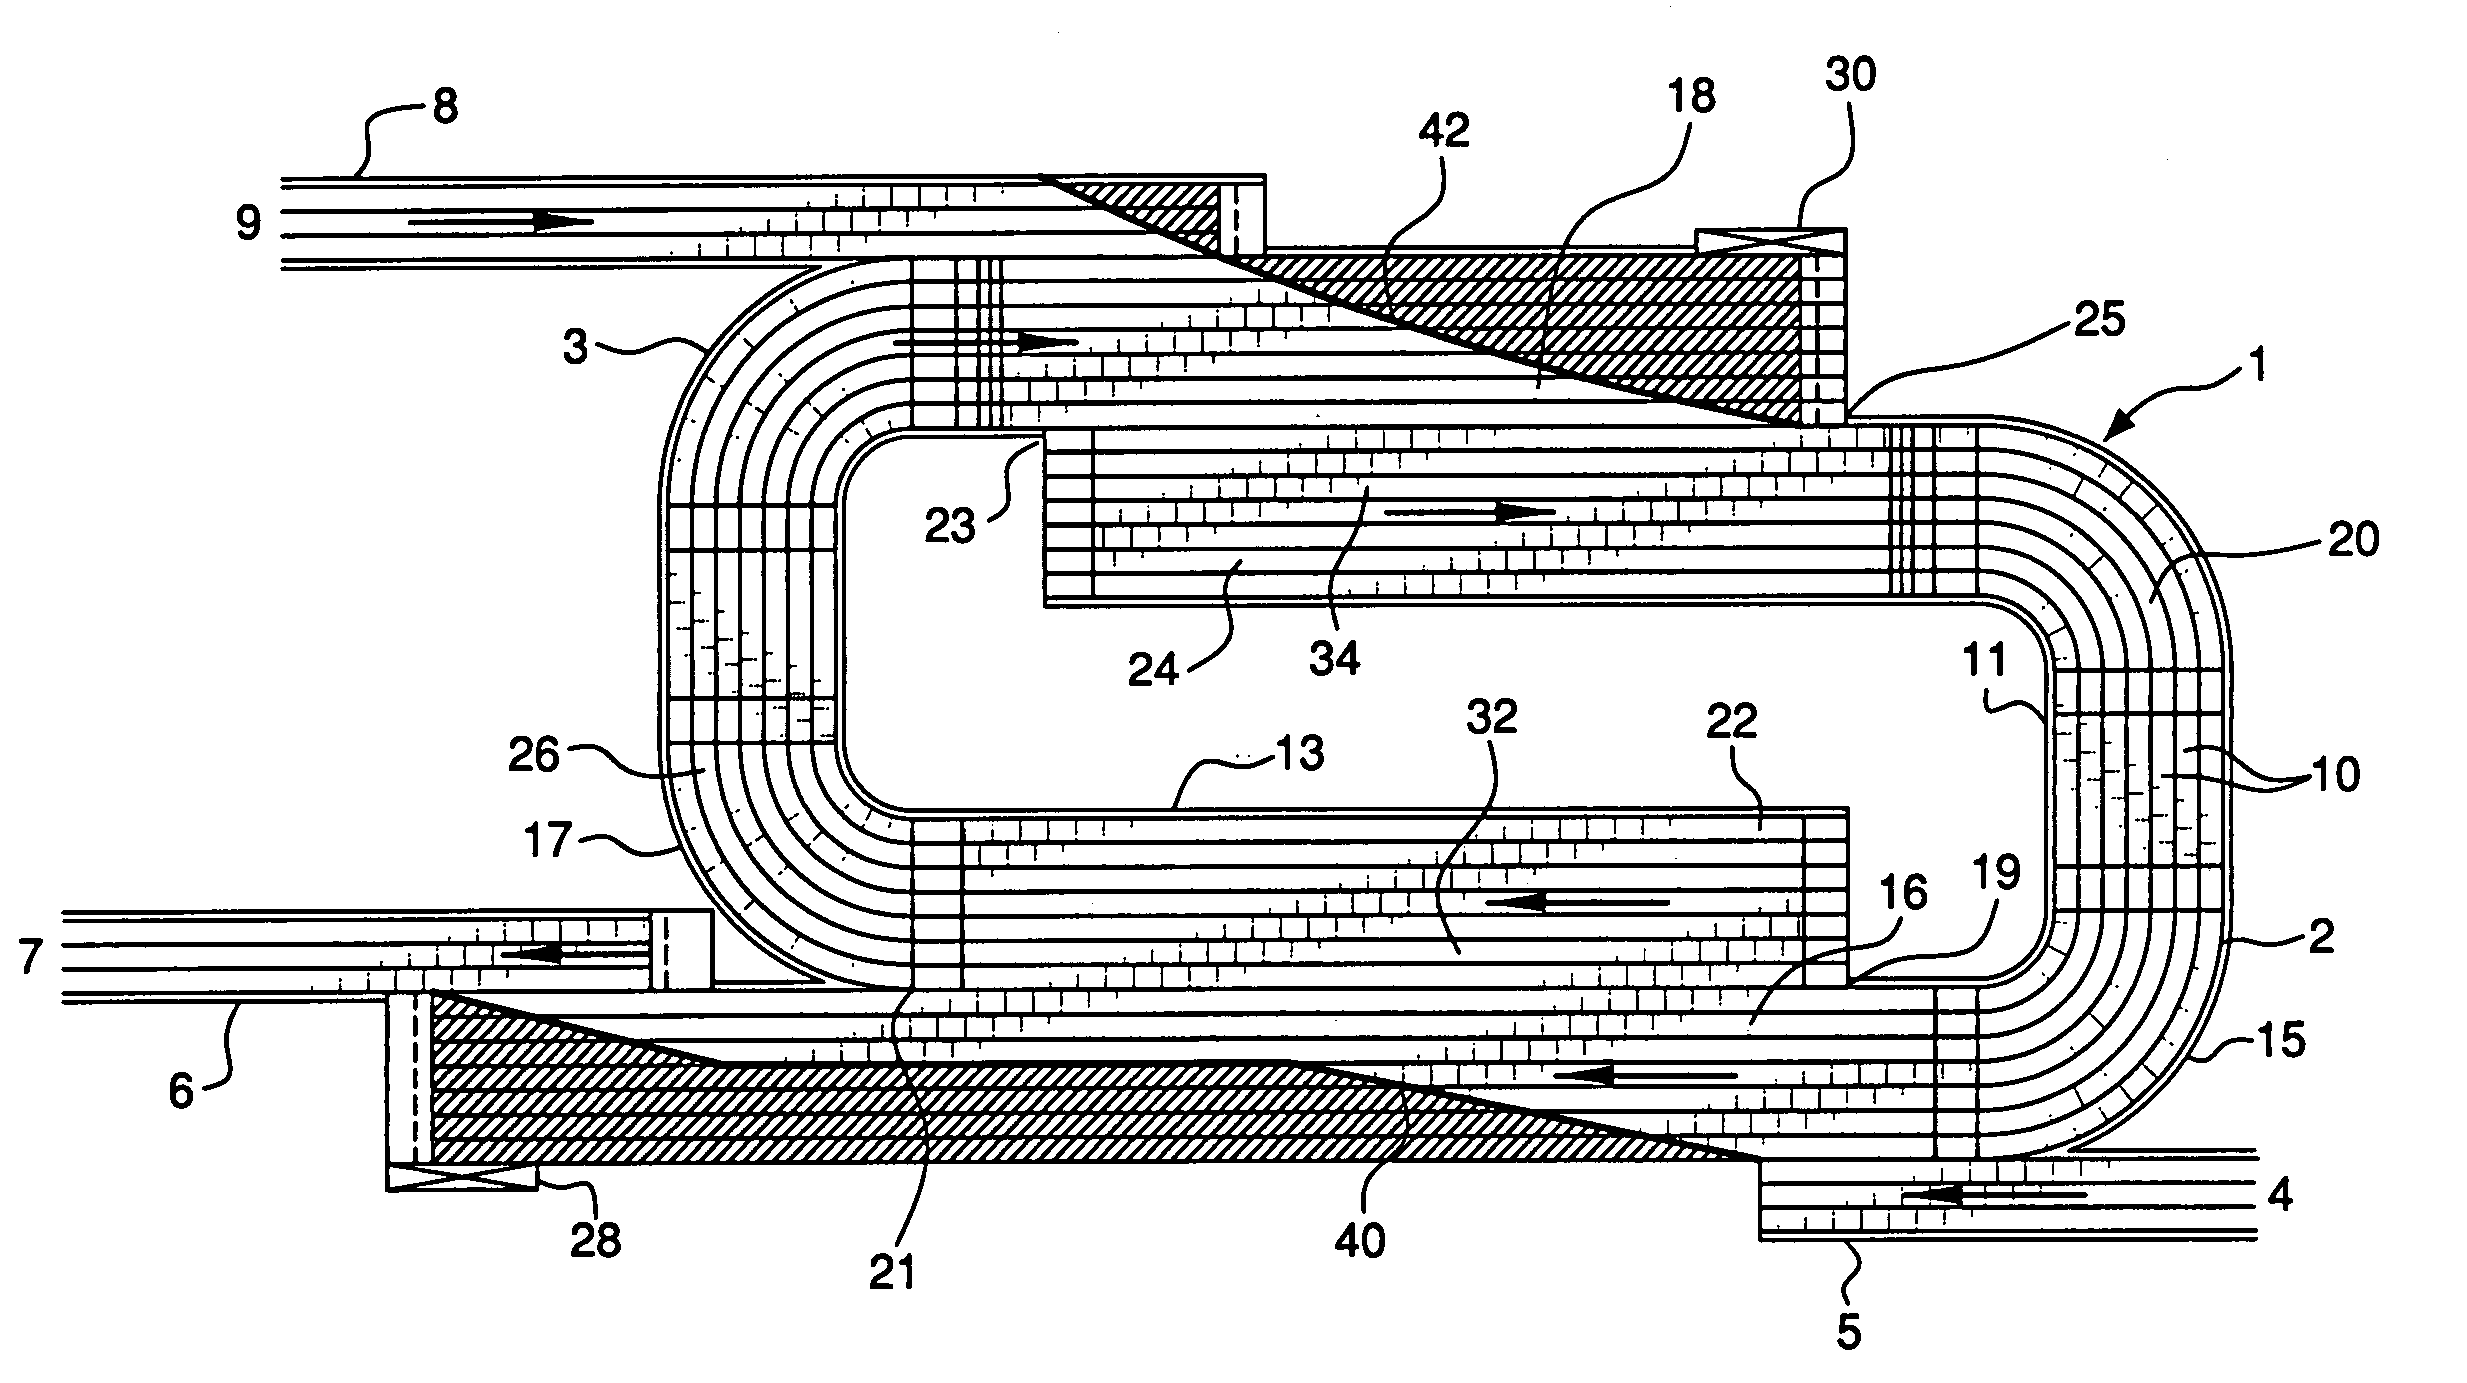 Dual conveyor product conveying and accumulation system